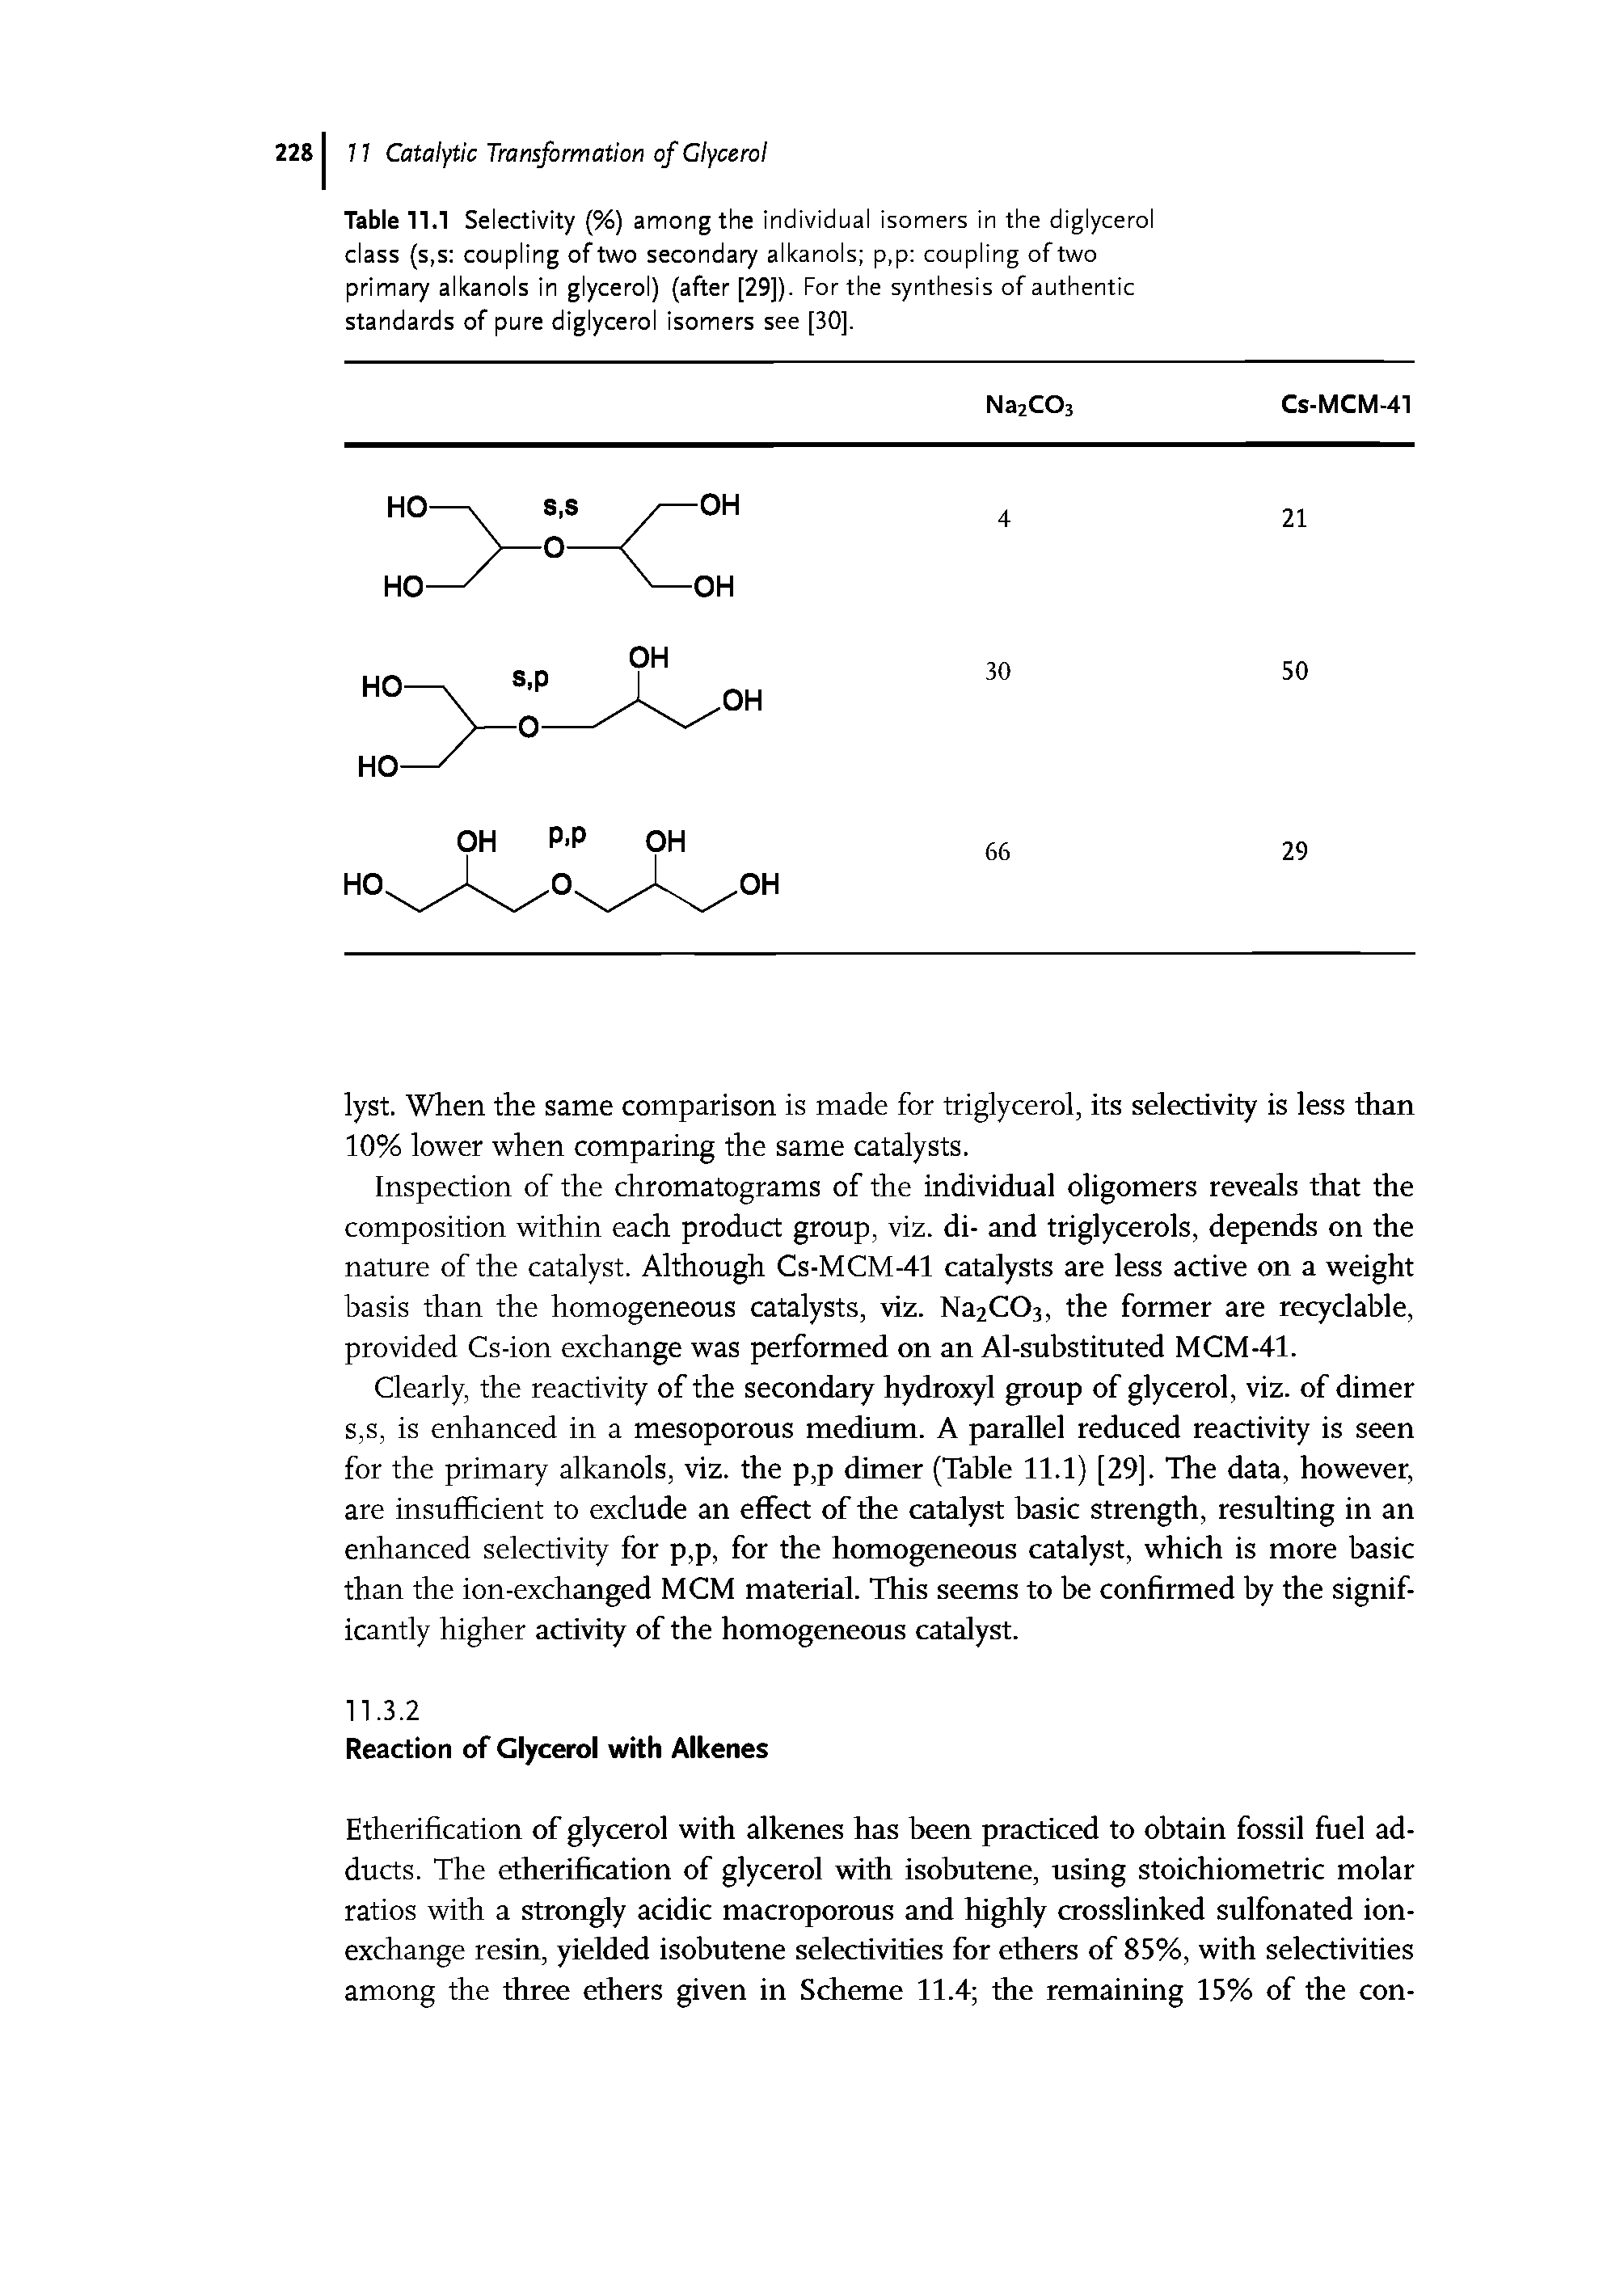 Table 11.1 Selectivity (%) among the individual isomers in the diglycerol class (s,s coupling of two secondary alkanols p,p coupling of two primary alkanols in glycerol) (after [29]). For the synthesis of authentic standards of pure diglycerol isomers see [30],...